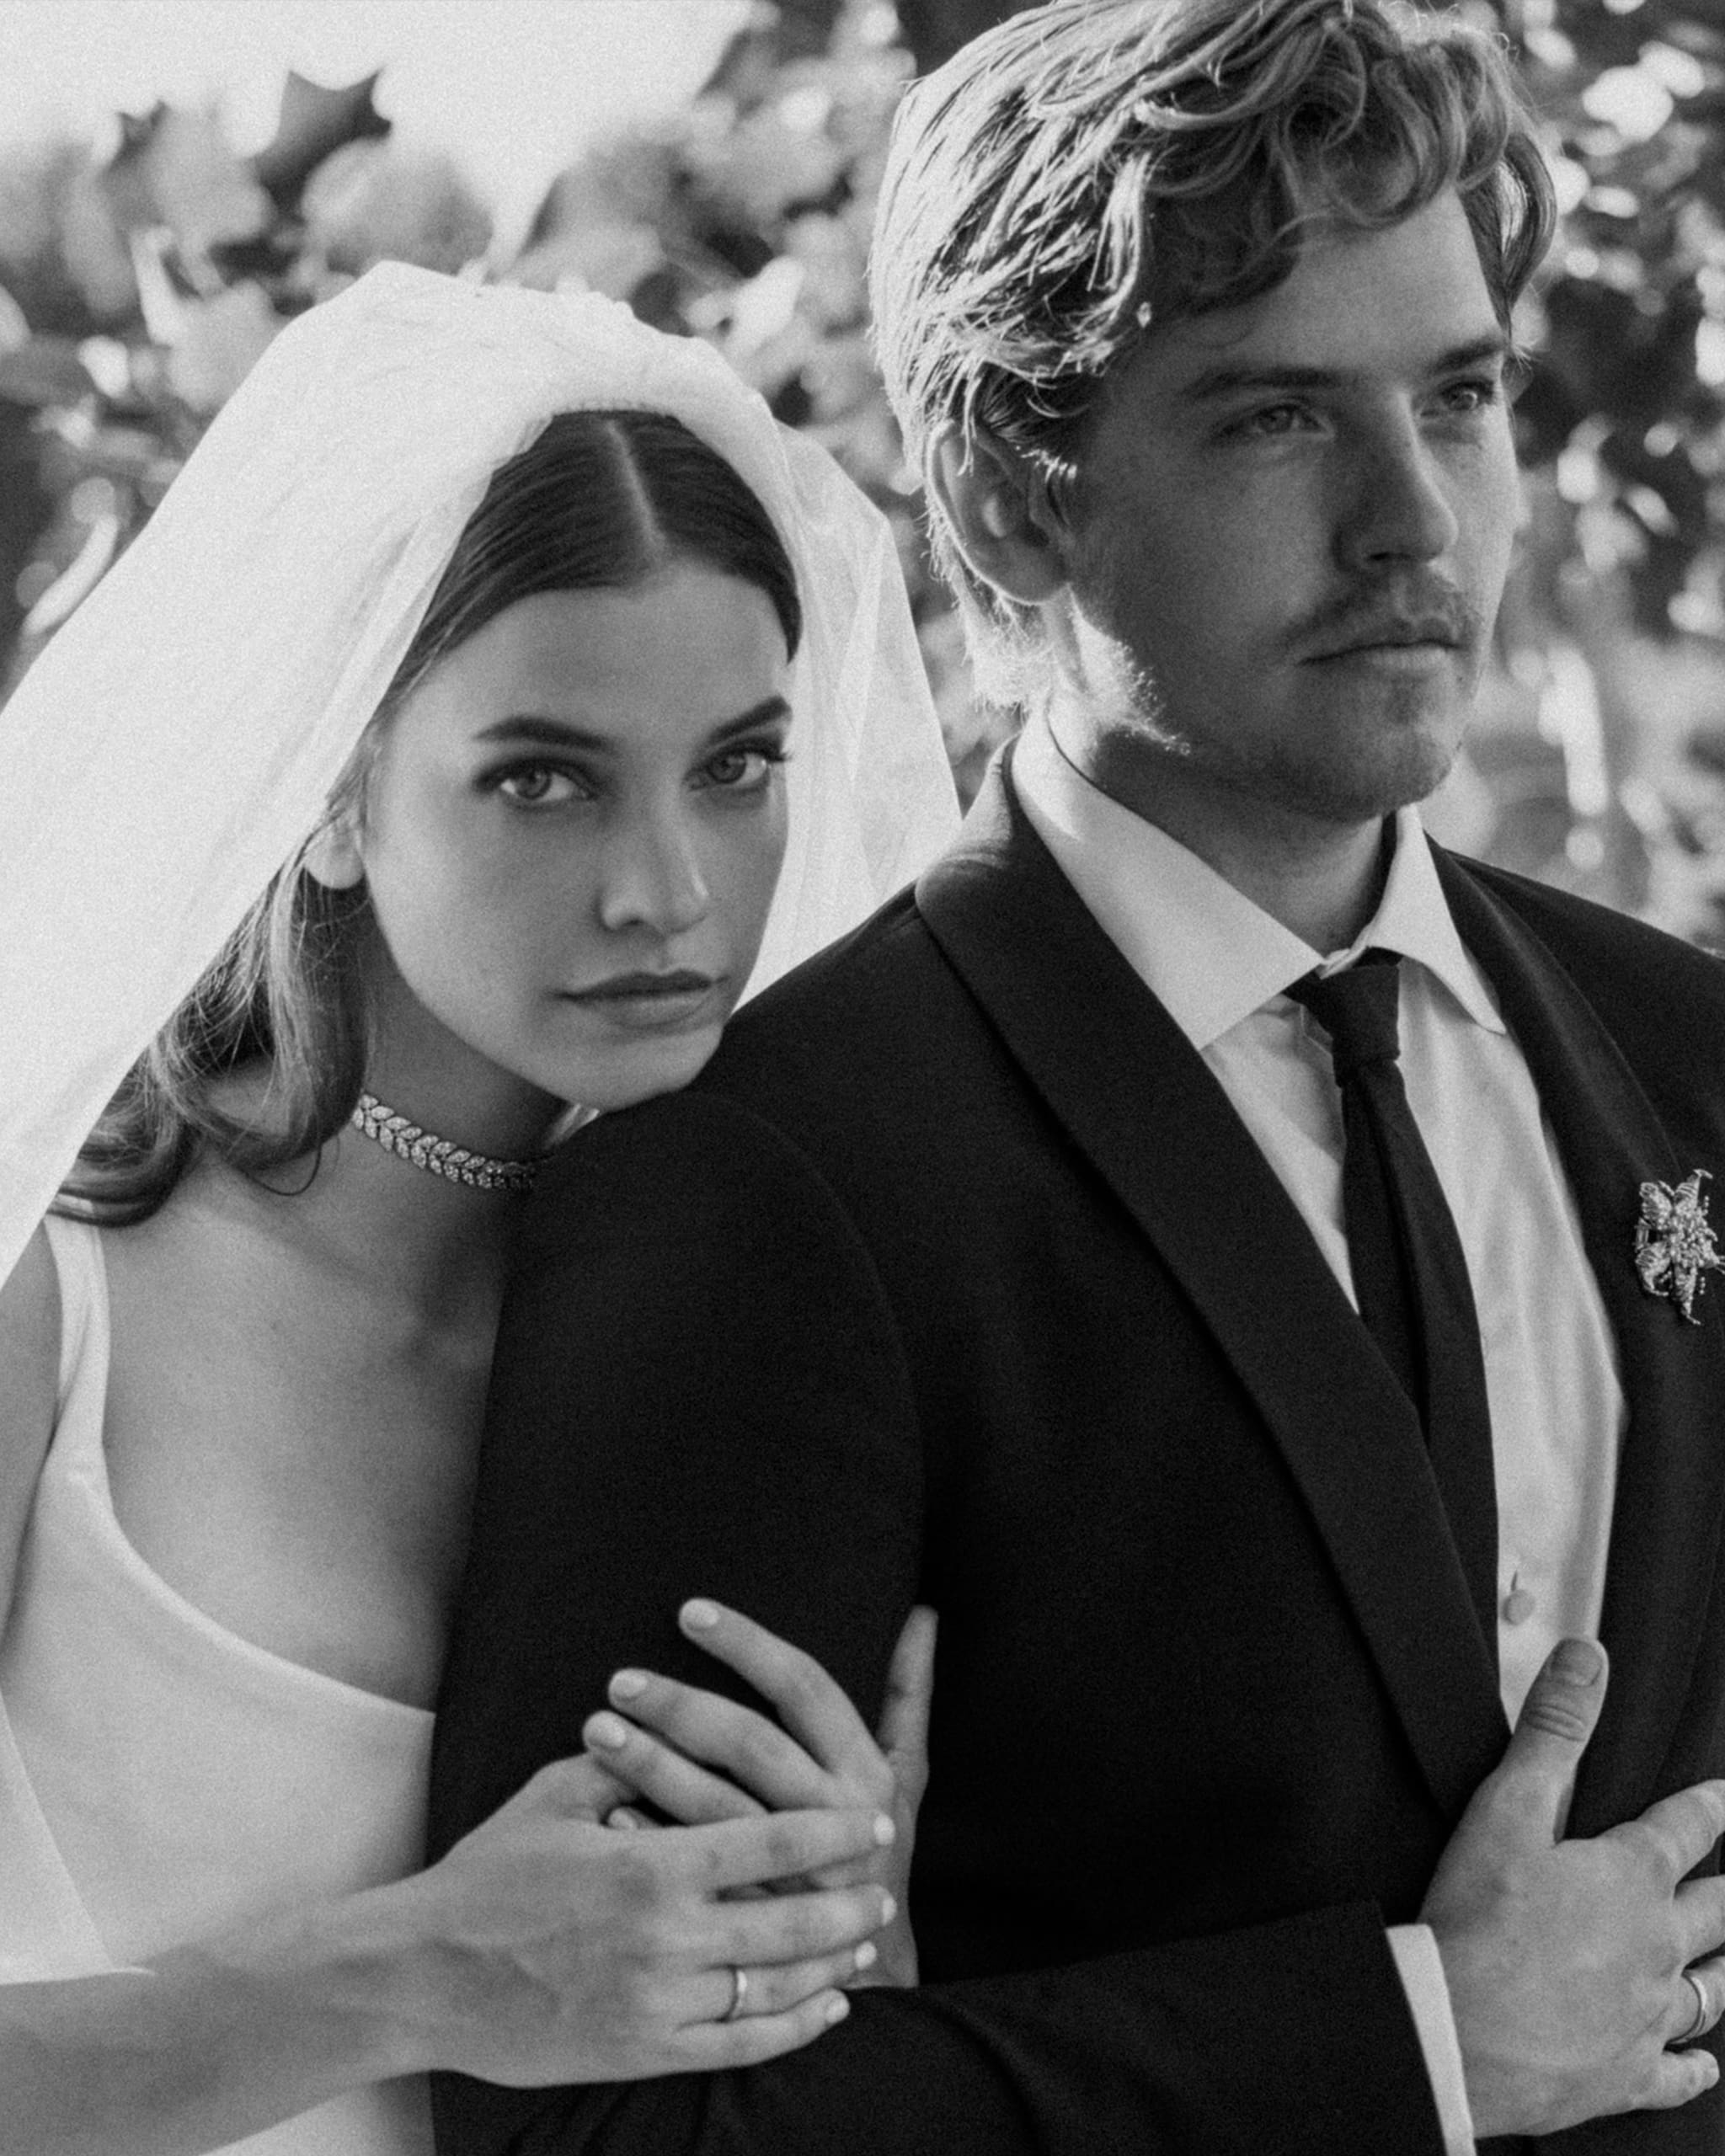 Barbara Palvin and Dylan Sprouse getting married